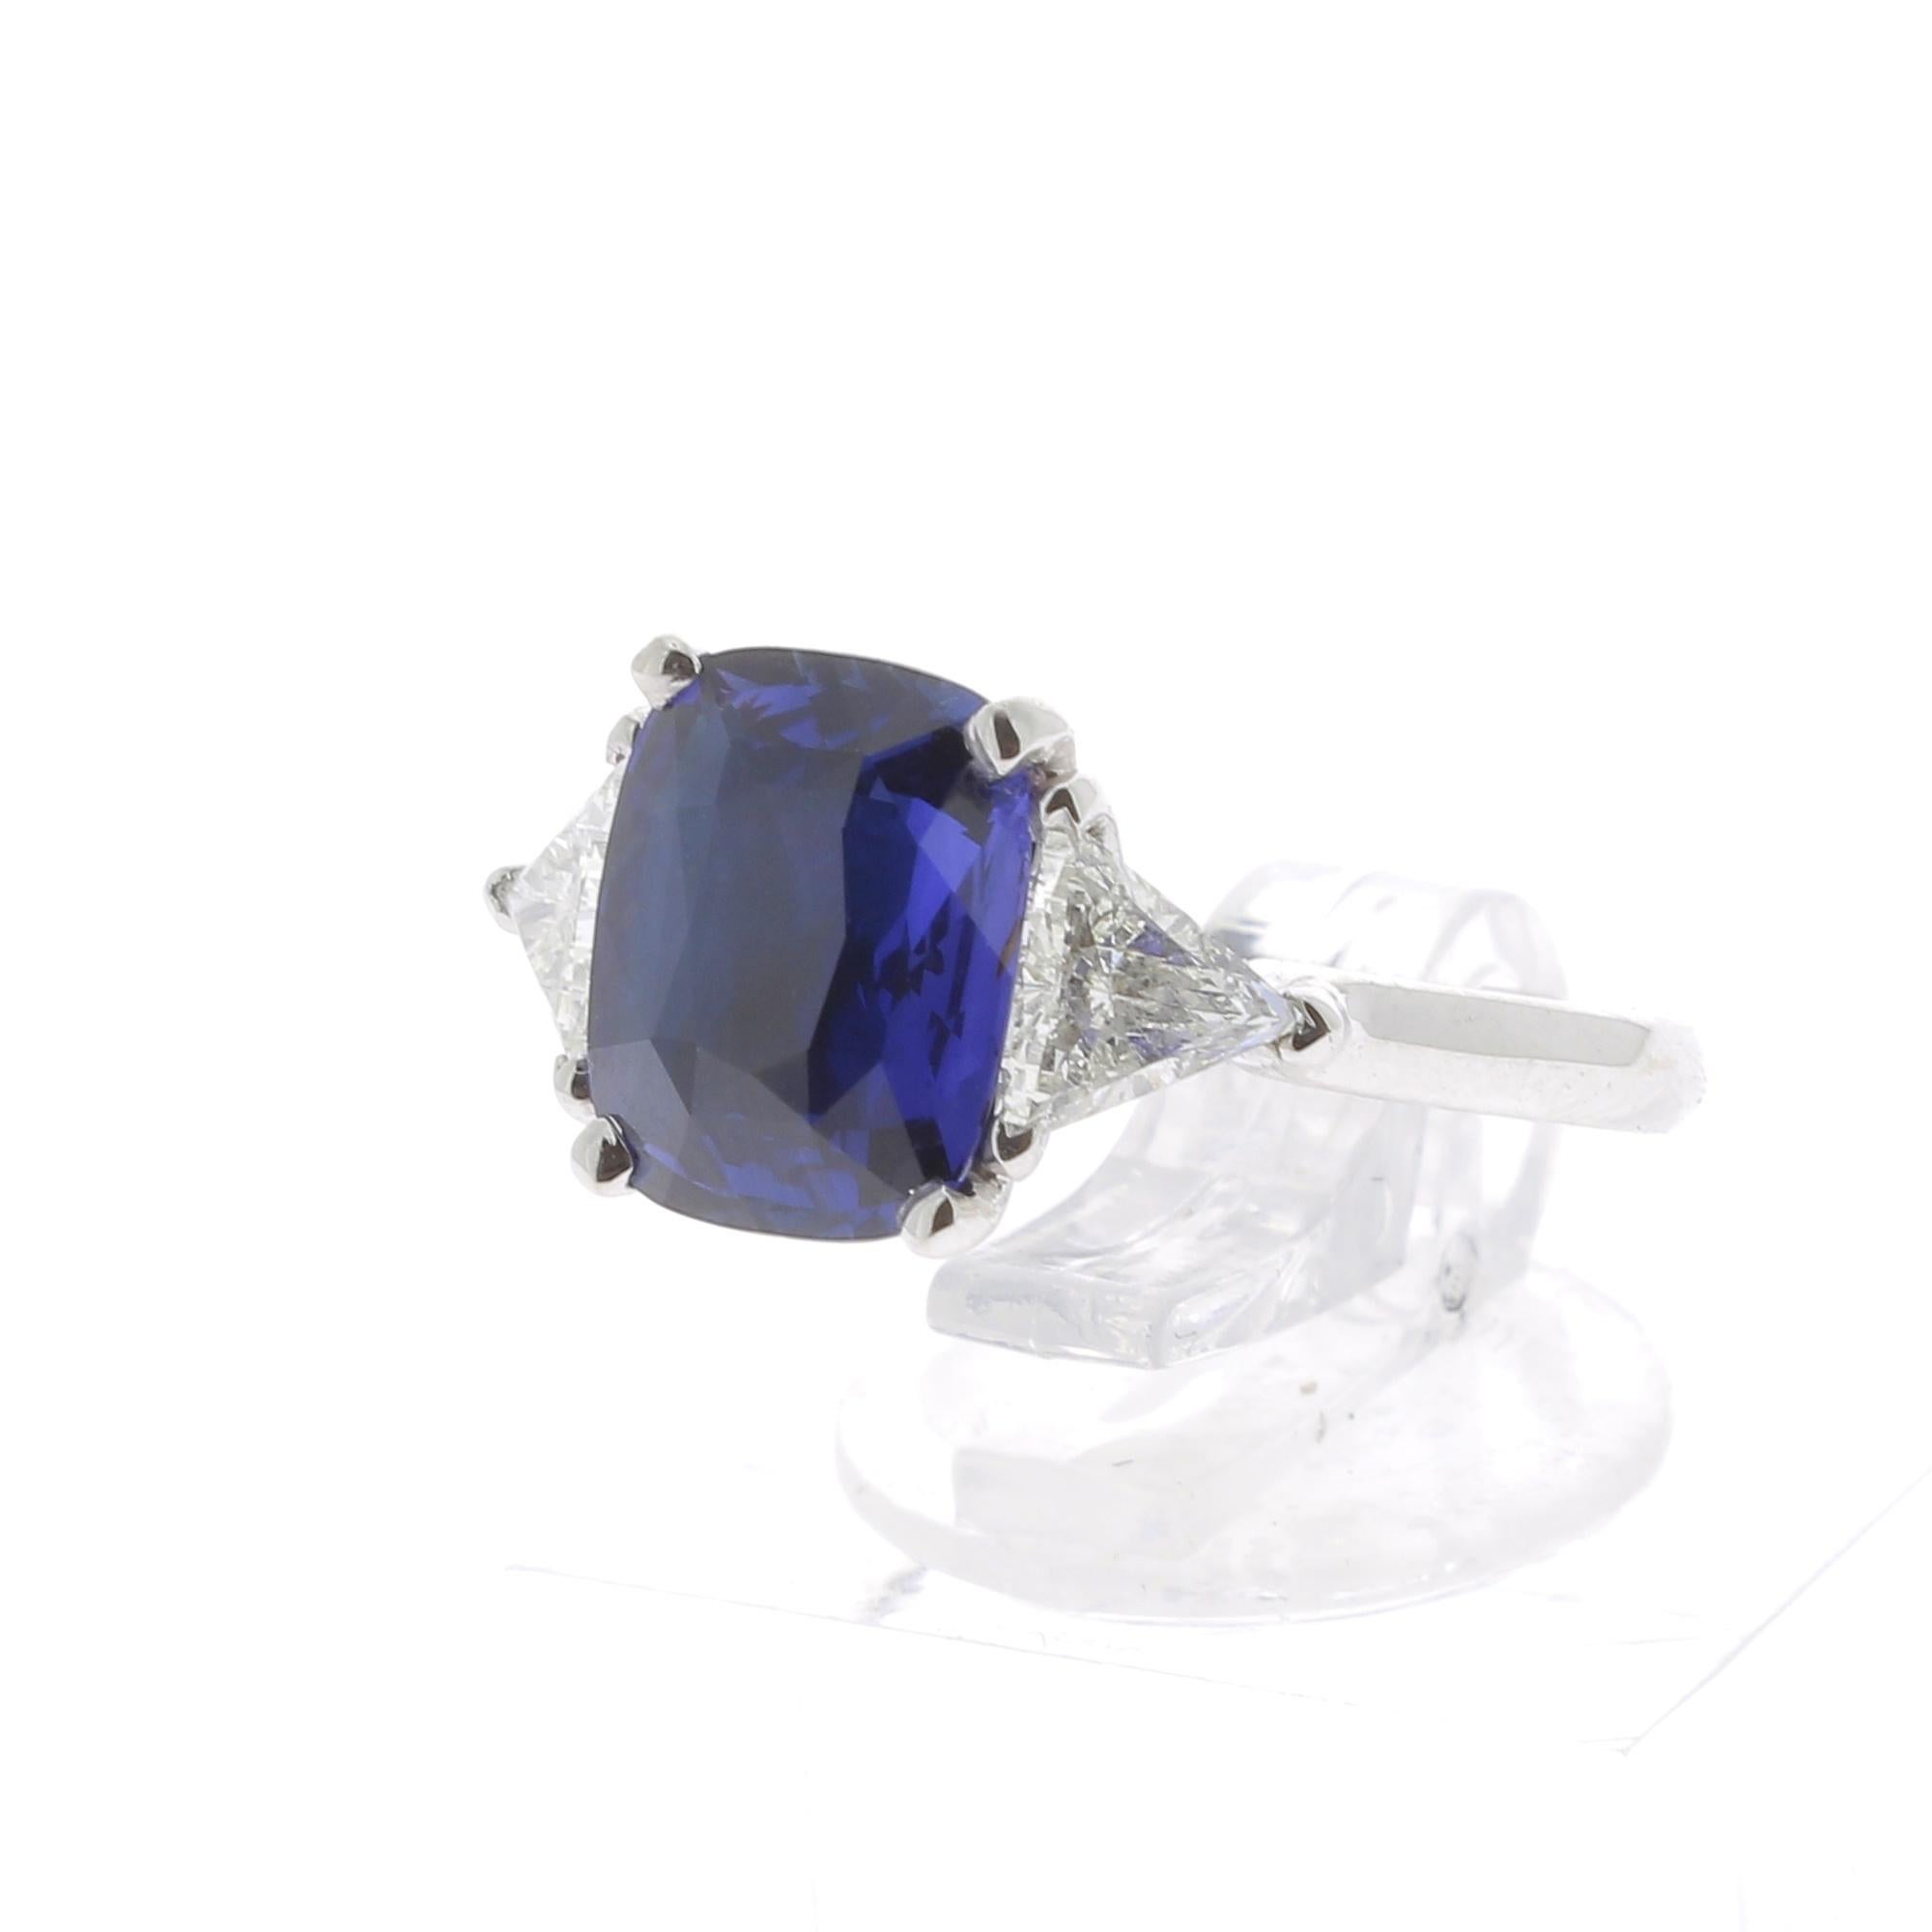 A Ceylon Sapphire Ring, flanked on each side by a single Triangle Diamond.
The total weight of the Ceylon  Sapphire ( or Sri Lanka Sapphire ) is 3.57 Carat.
The Diamonds Triangles weight is 0.76 Carat ( 2 Triangle-cut-diamonds).
The Sapphire is